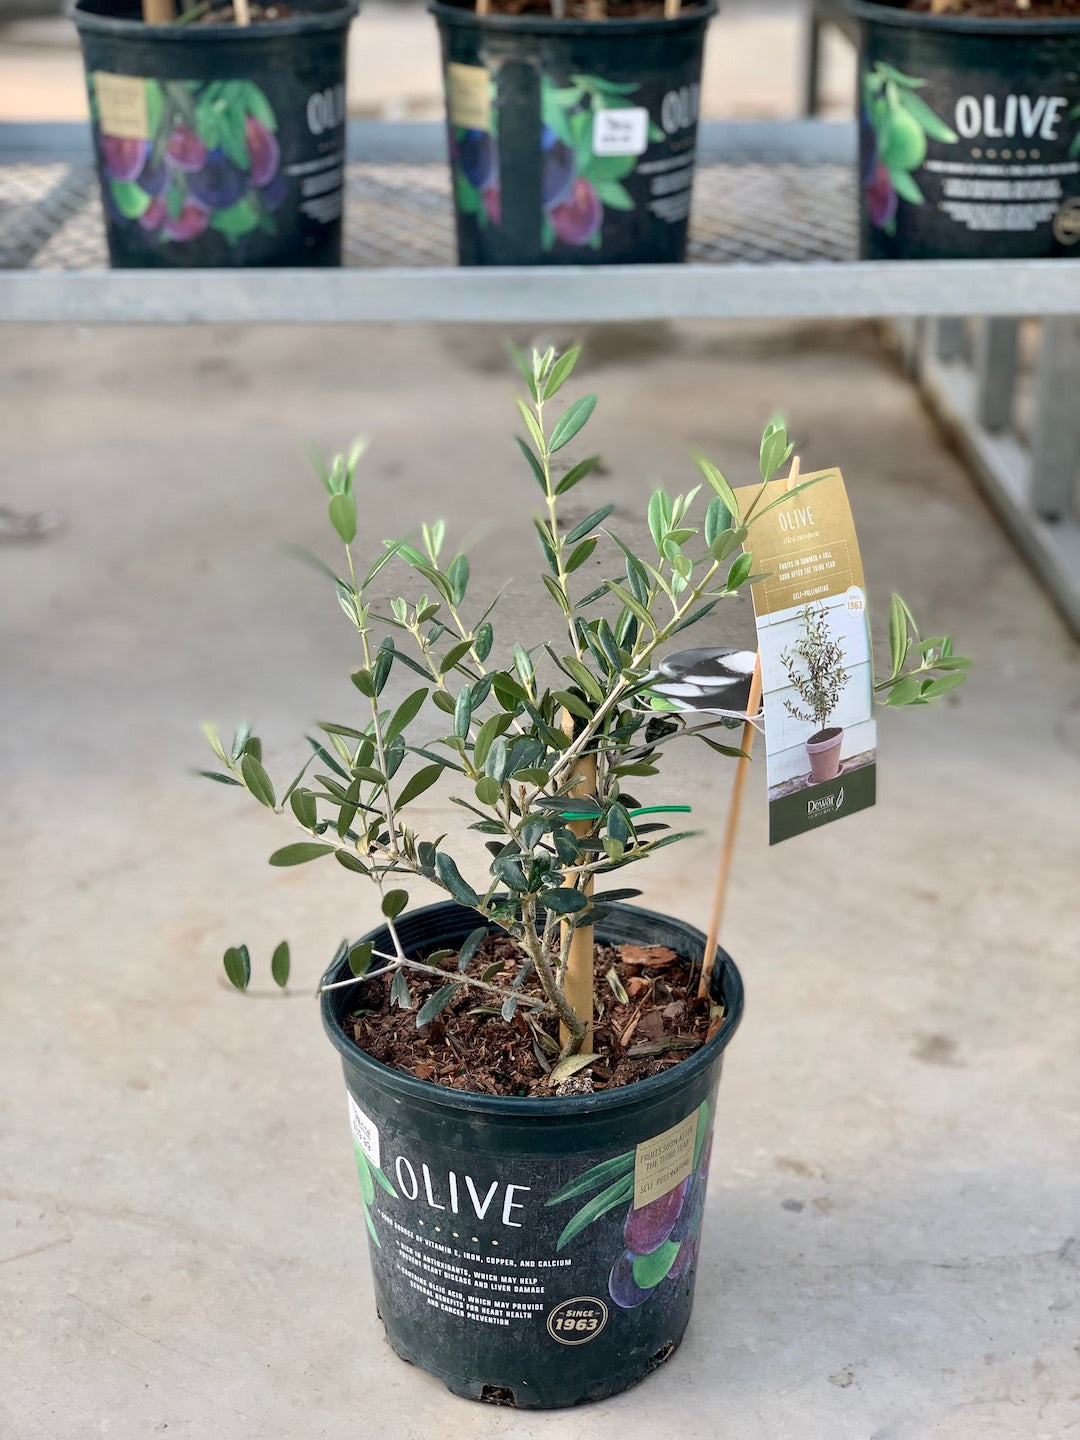 Olive Tree (Olea europaea 'Arbequina') in a 8 inch pot. Indoor plant for sale by Promise Supply for delivery and pickup in Toronto